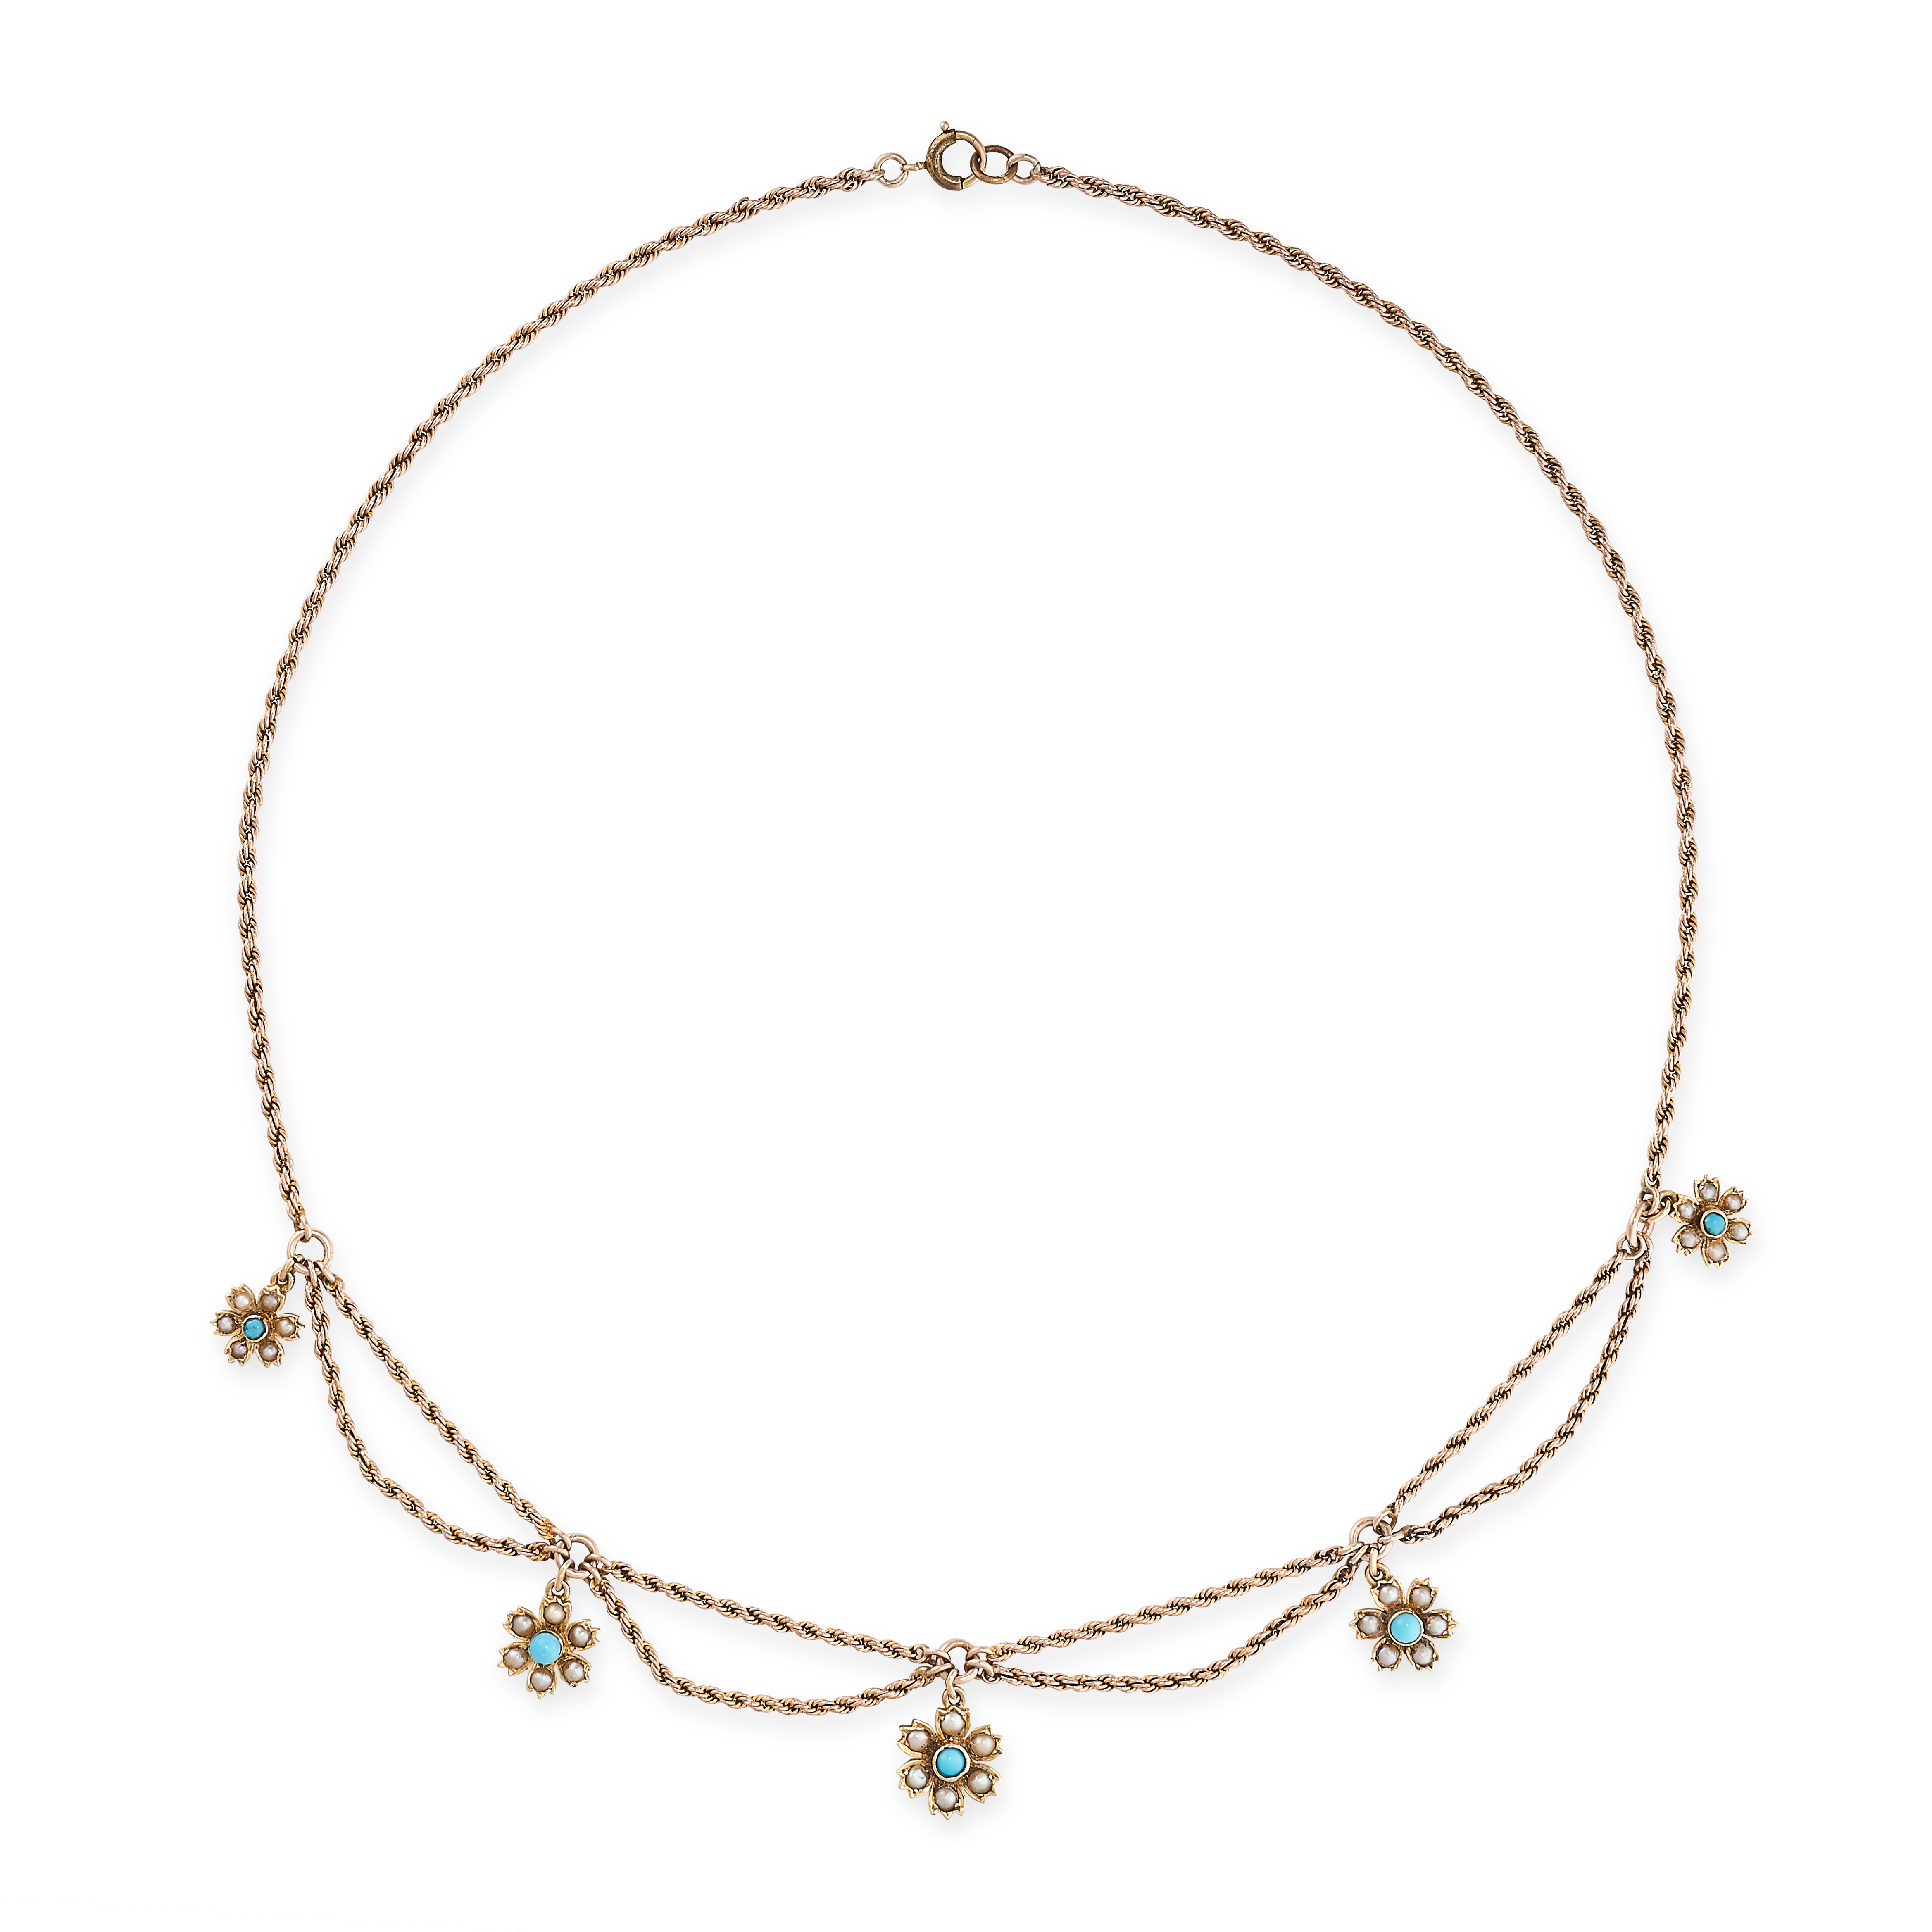 AN ANTIQUE TURQUOISE AND PEARL NECKLACE in yellow gold, the chain suspending five graduated pendants